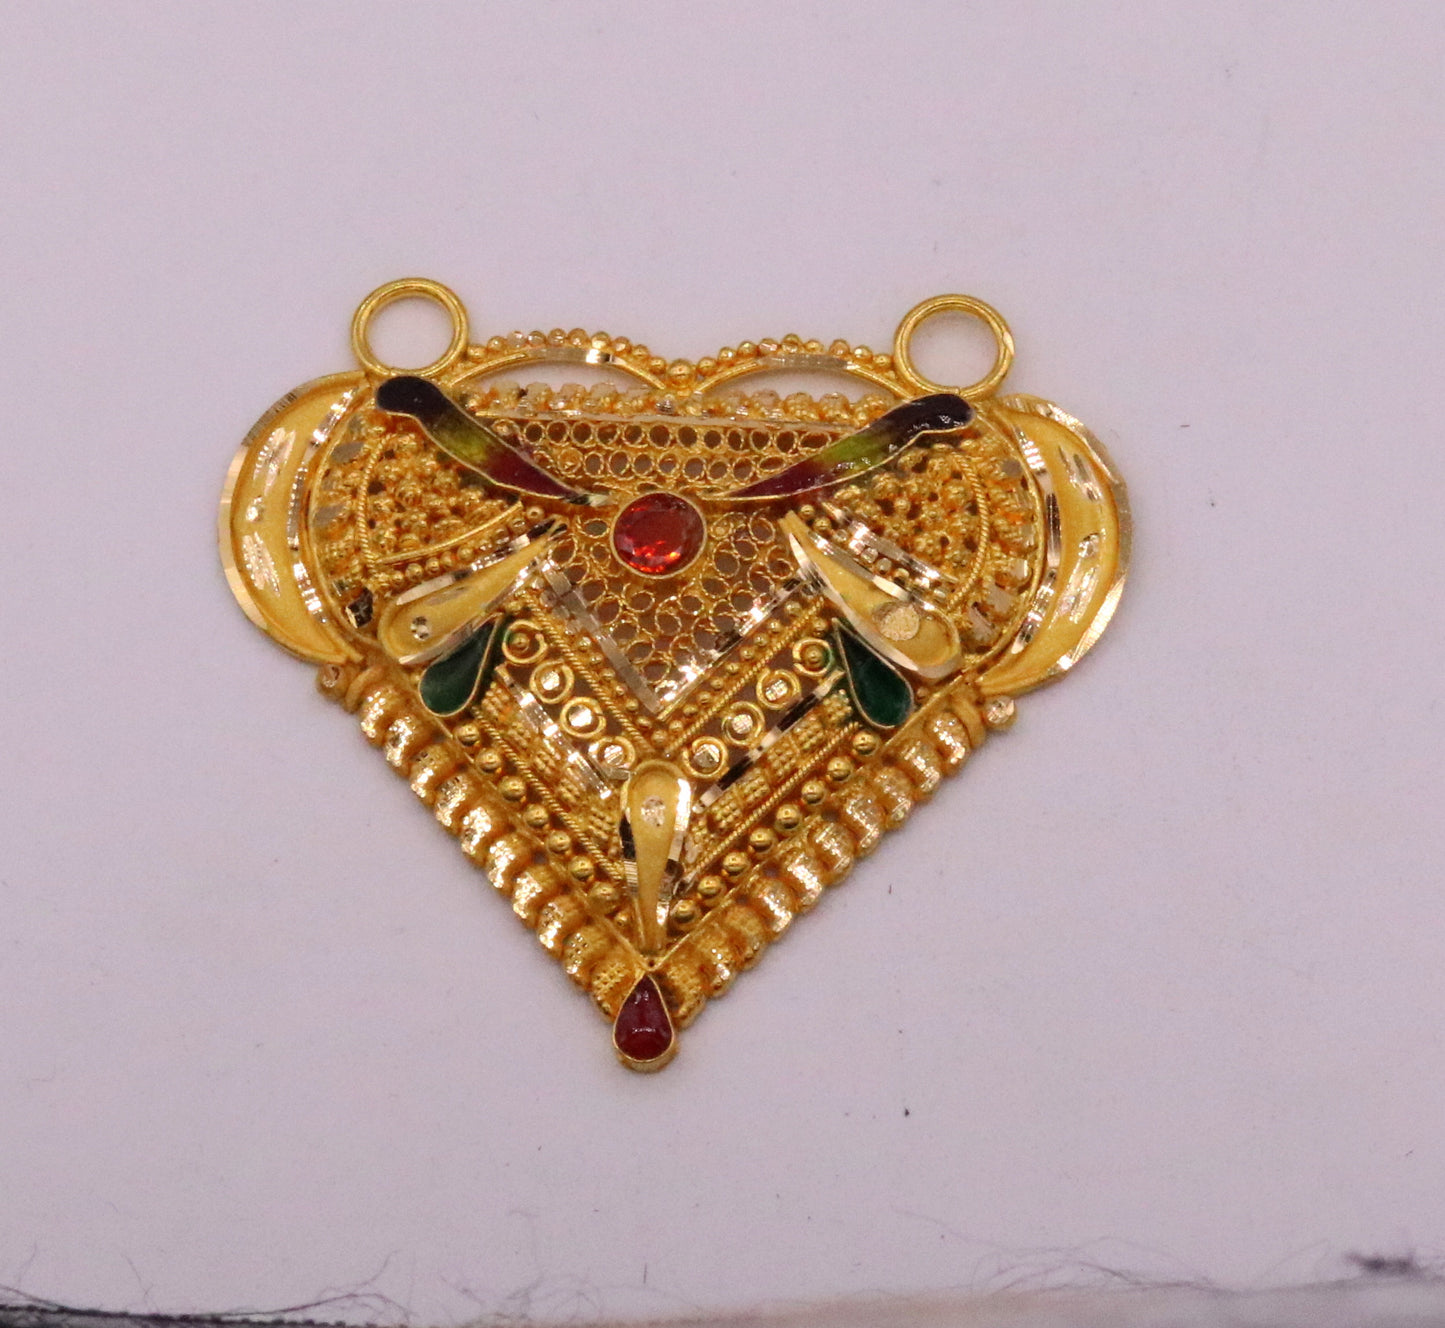 Vintage design Genuine certified 22kt yellow gold filigree work meenakari pendant necklace traditional art of indian tribal jewelry gp13 - TRIBAL ORNAMENTS